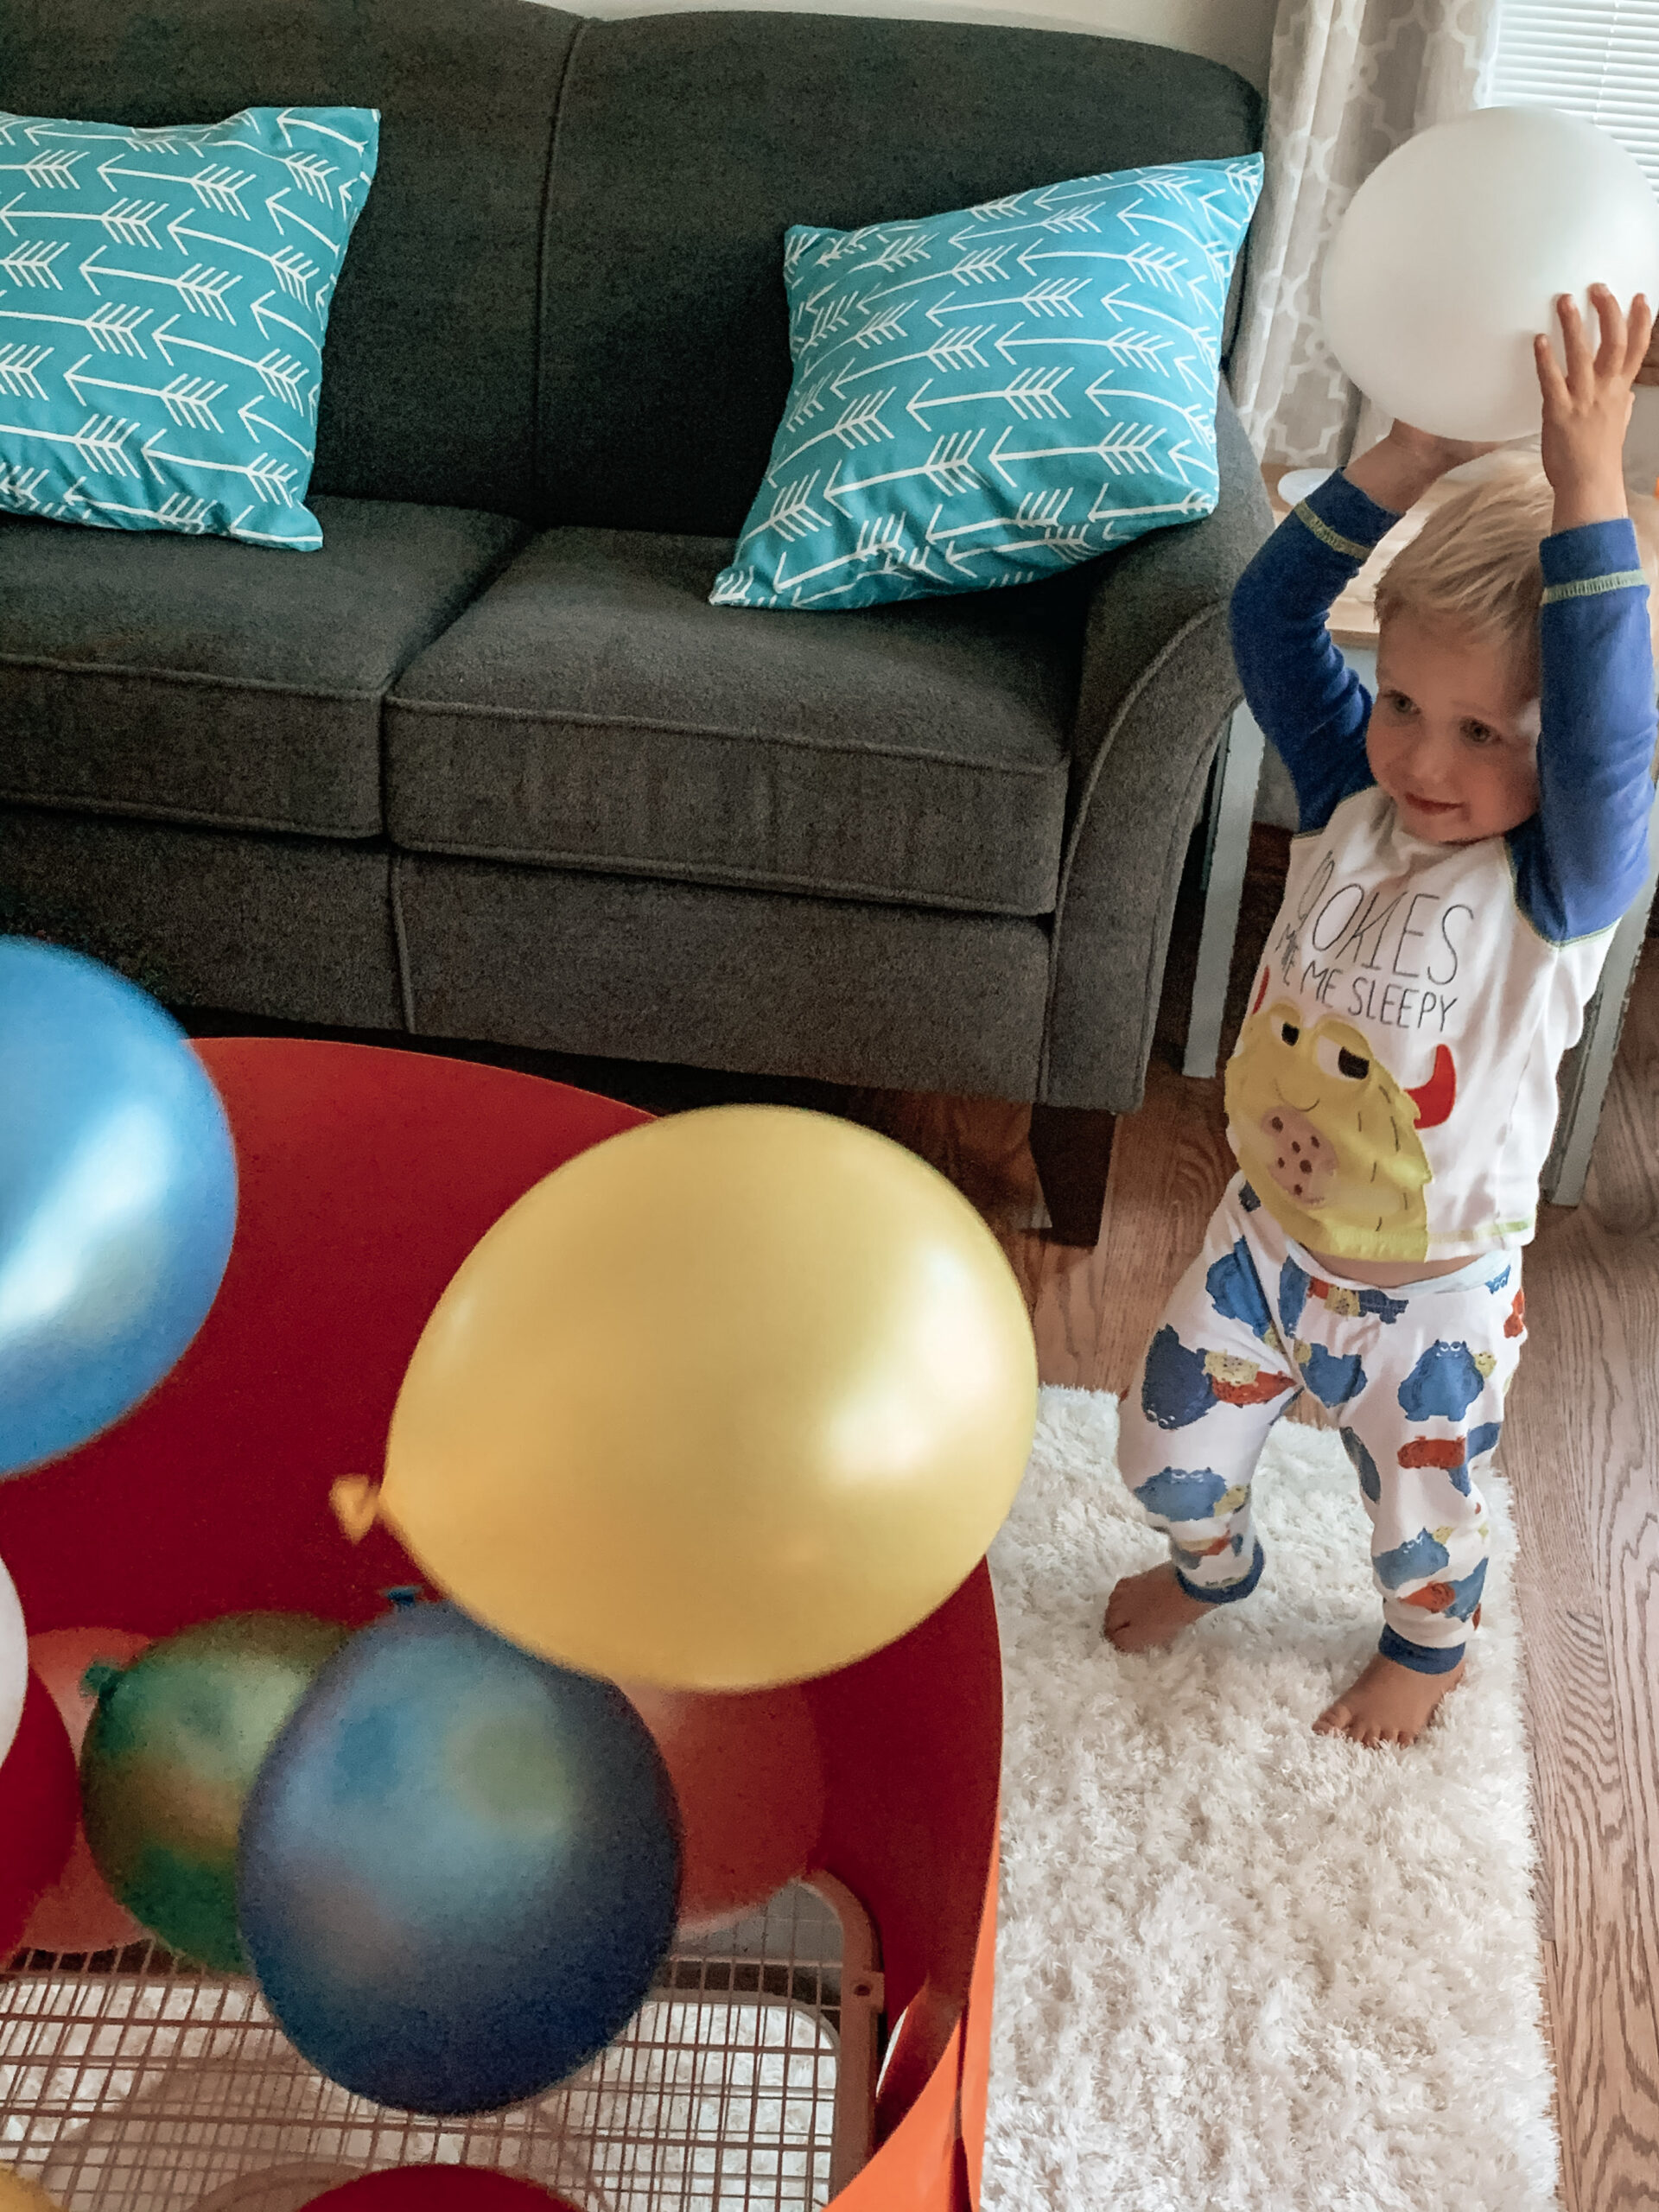 Kid throwing a balloon back to the fan playing with a completed poster board craft and balloon activity